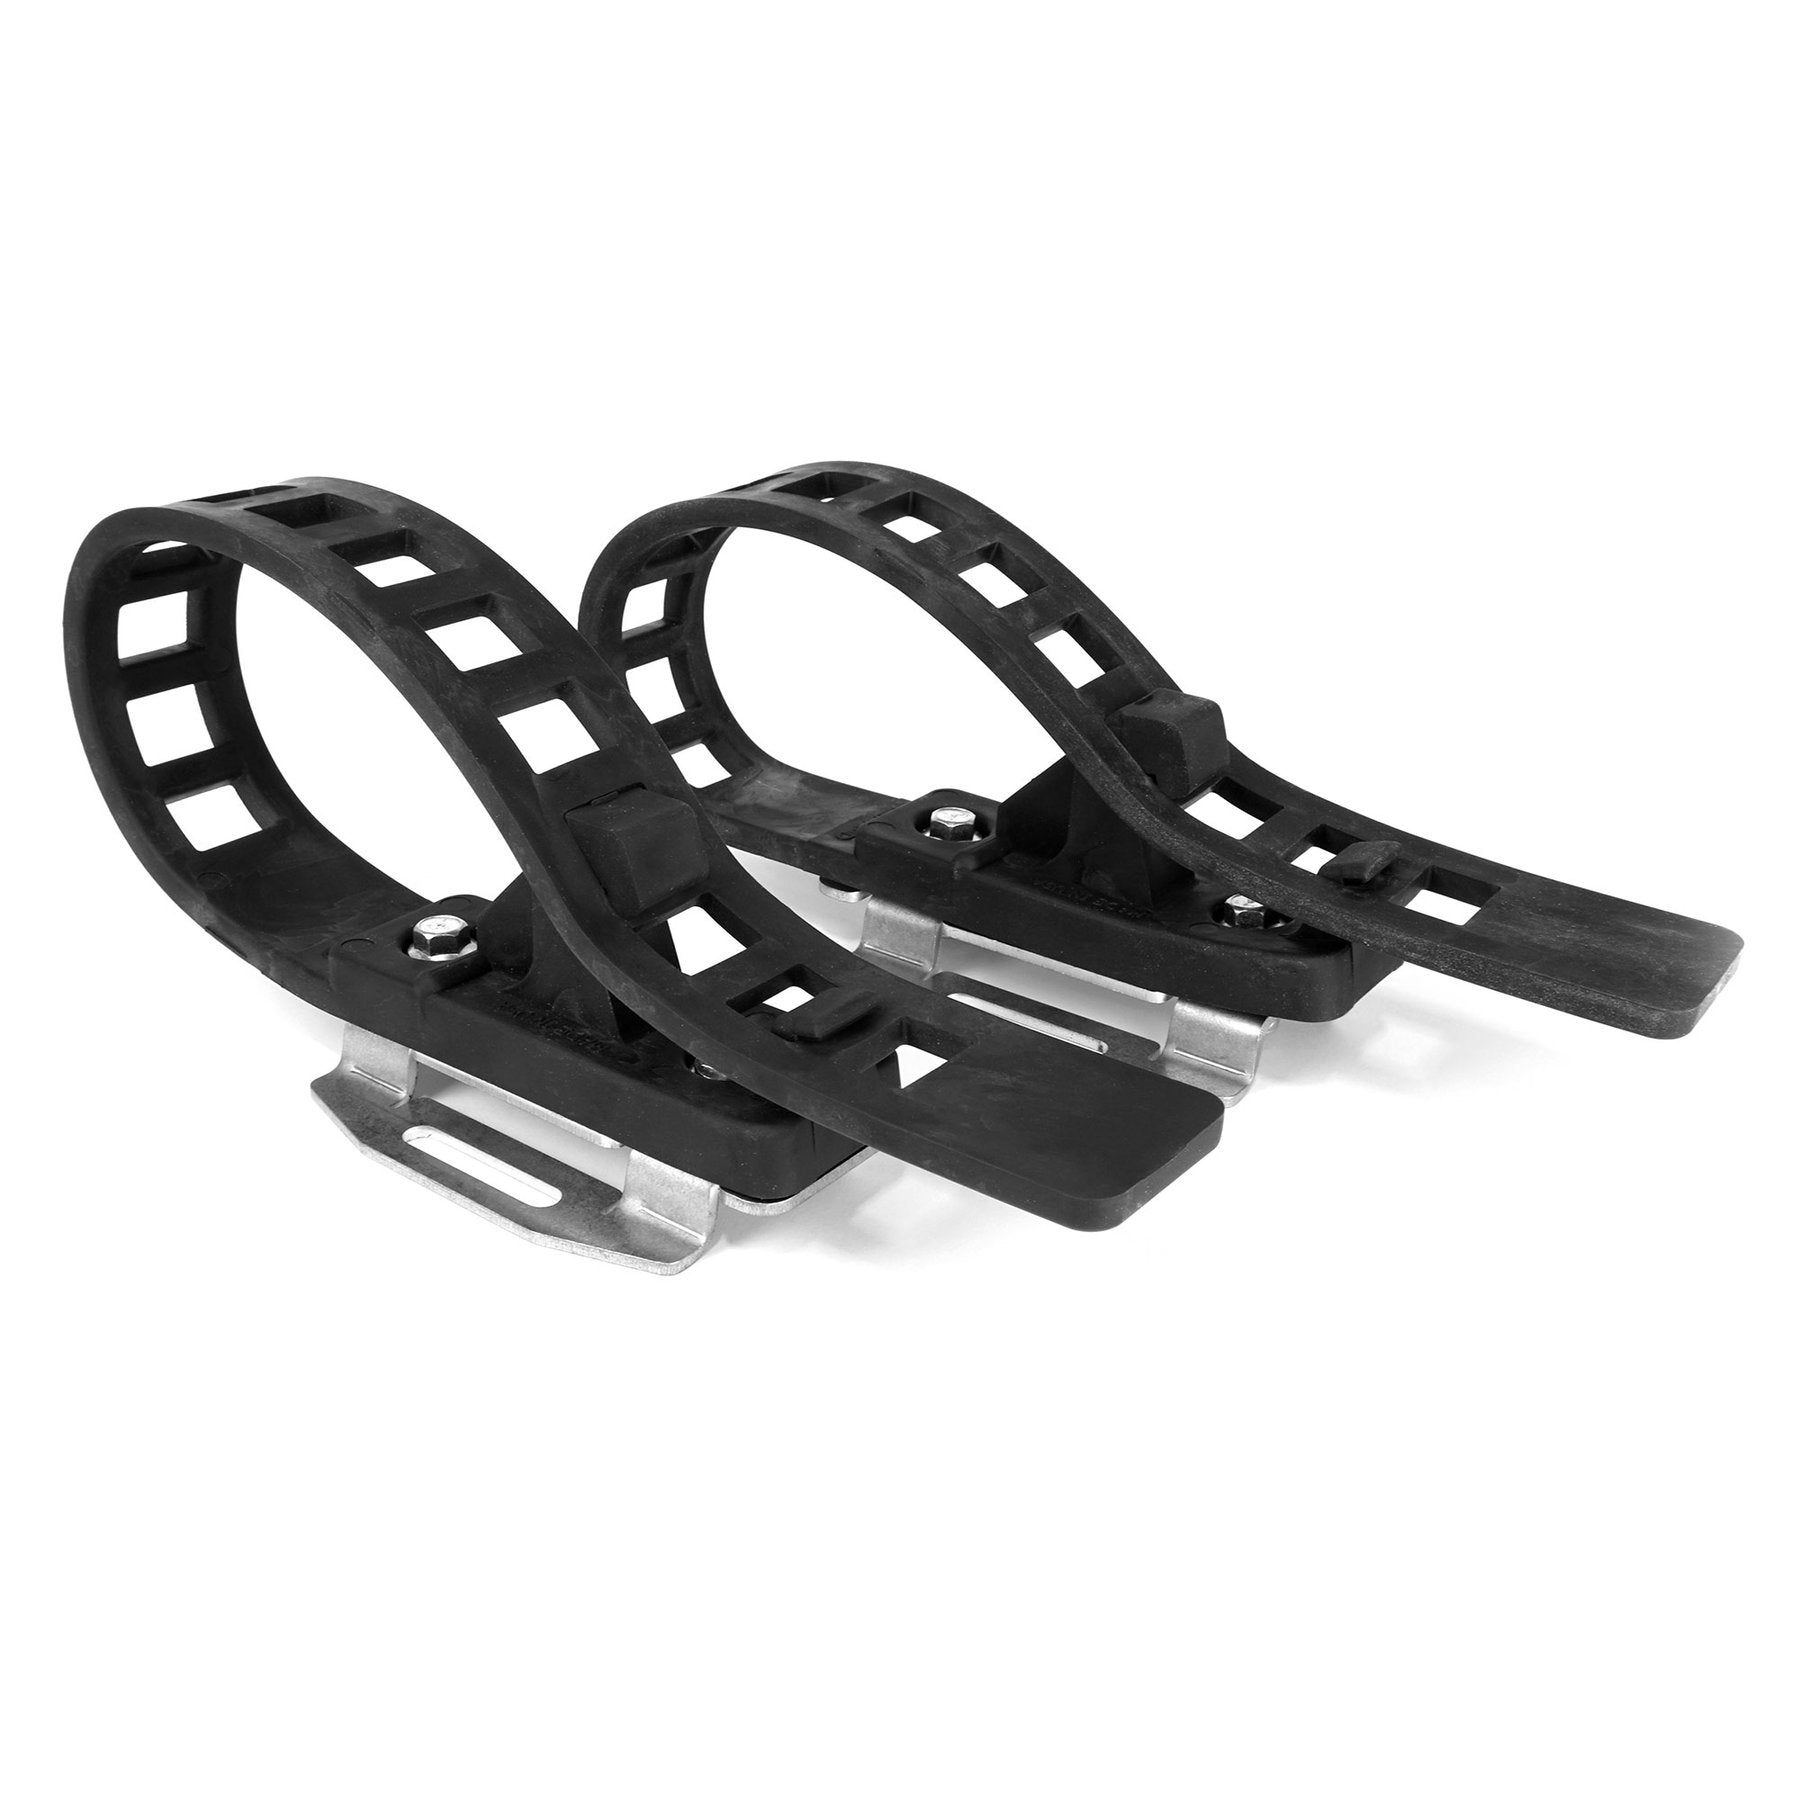 Riser Mount (pair) - QF Long Arm Clamp w/ Clamps